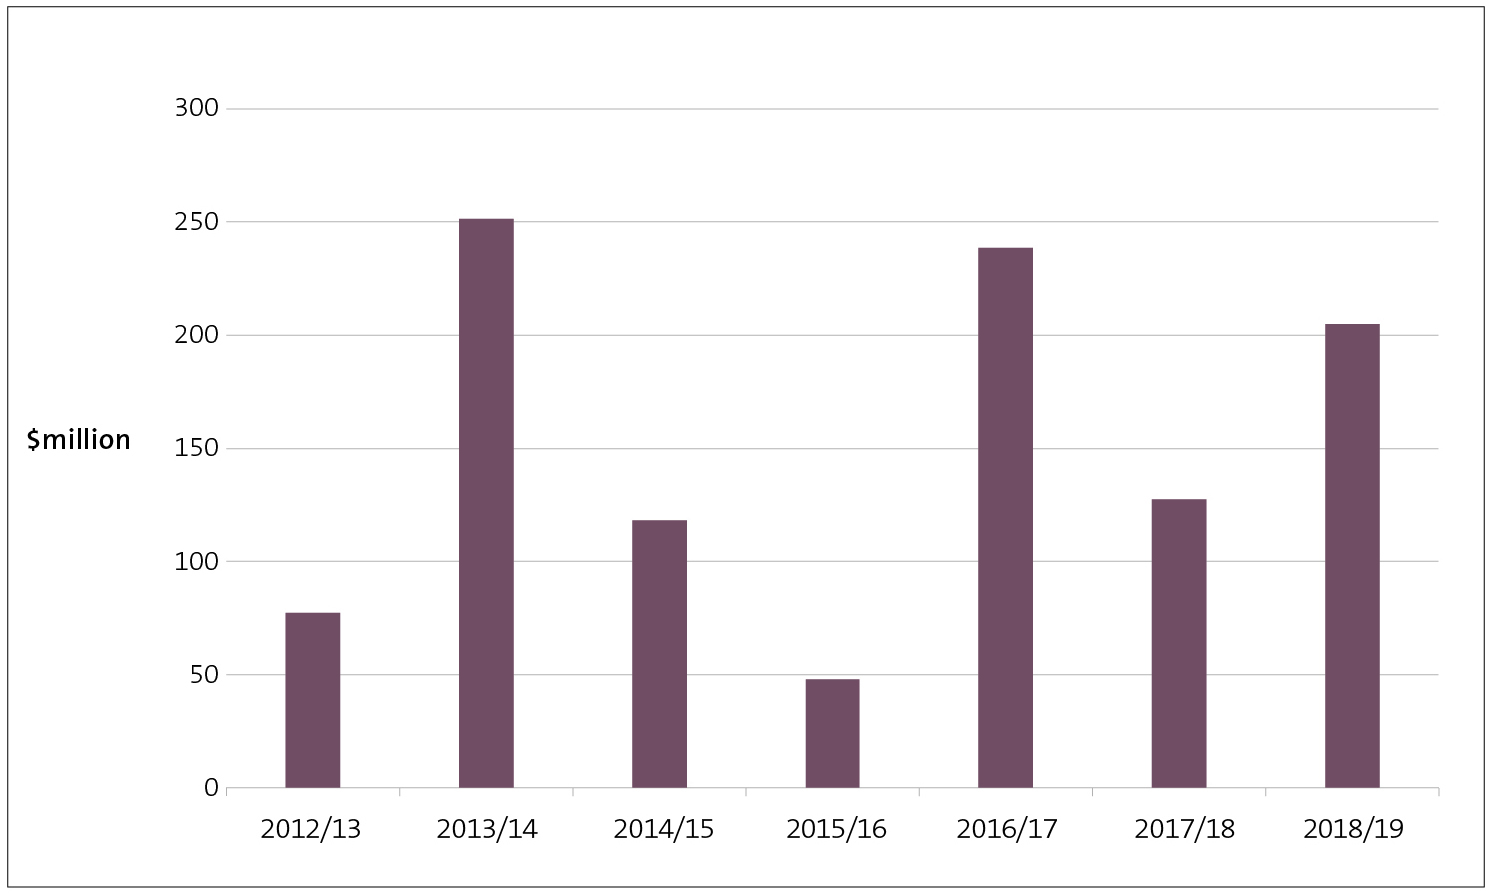 Figure 6 - Number of instances of unappropriated expenditure, from 2012/13 to 2018/19